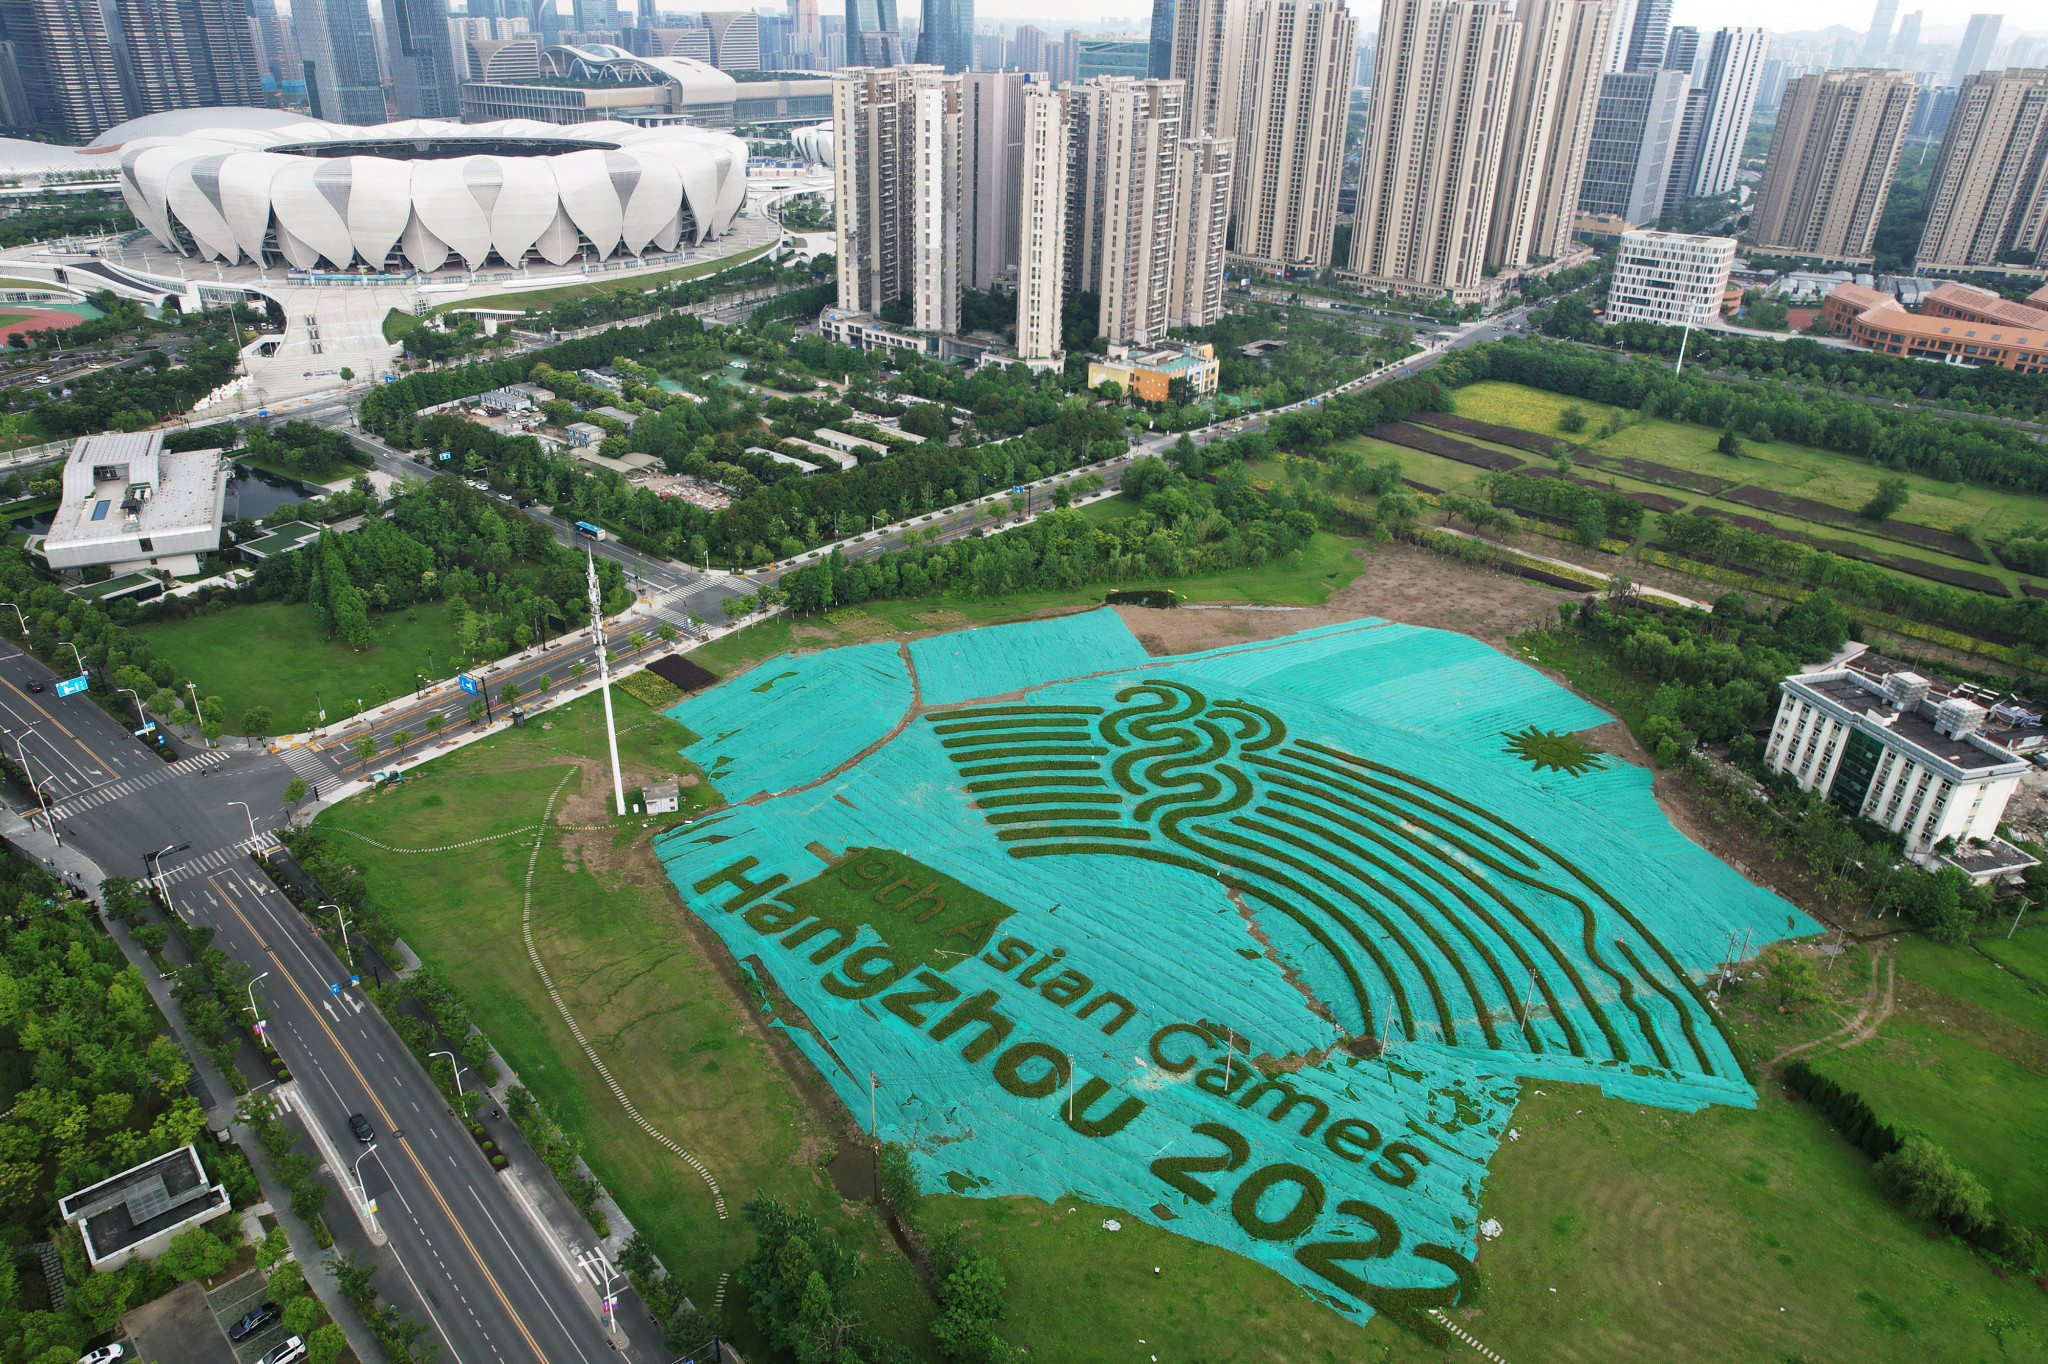 Hangzhou 2022 reports "smooth progress" on Asian Games and Para Games preparations